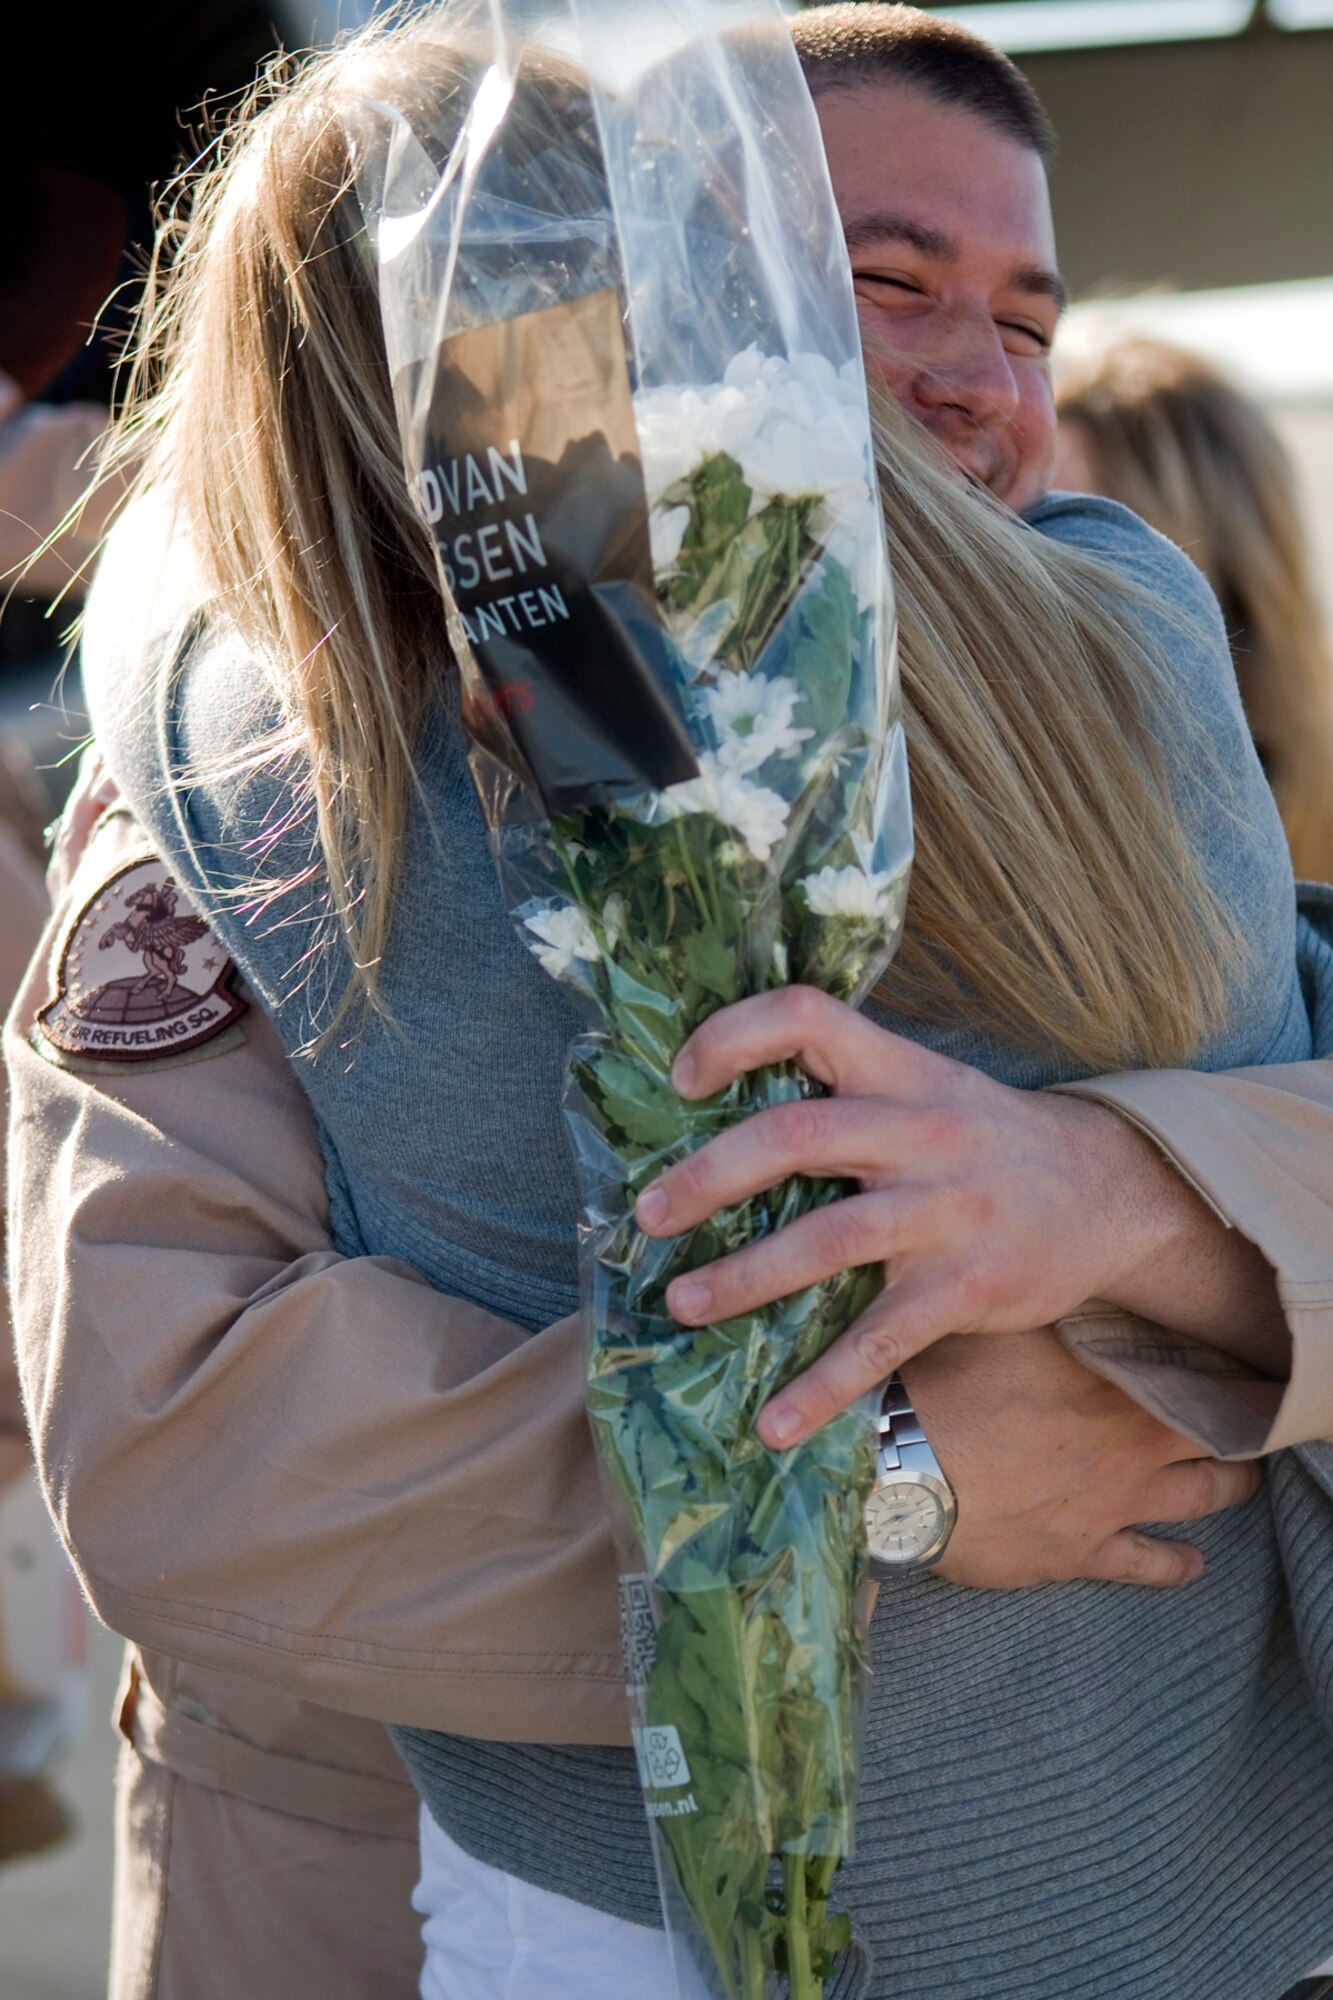 GRISSOM AIR RESERVE BASE, Ind. -- Capt. Jacob Creel, 72nd Air Refueling Wing pilot, embraces his wife Stephanie after returning to Grissom from a deployment to Southwest Asia. Creel deployed with several other 434th Air Refueling Wing Airmen for over two months in support of Operations Enduing Freedom and Odyssey Dawn. (U.S. Air Force photo/Tech. Sgt. Mark R. W. Orders-Woempner)
